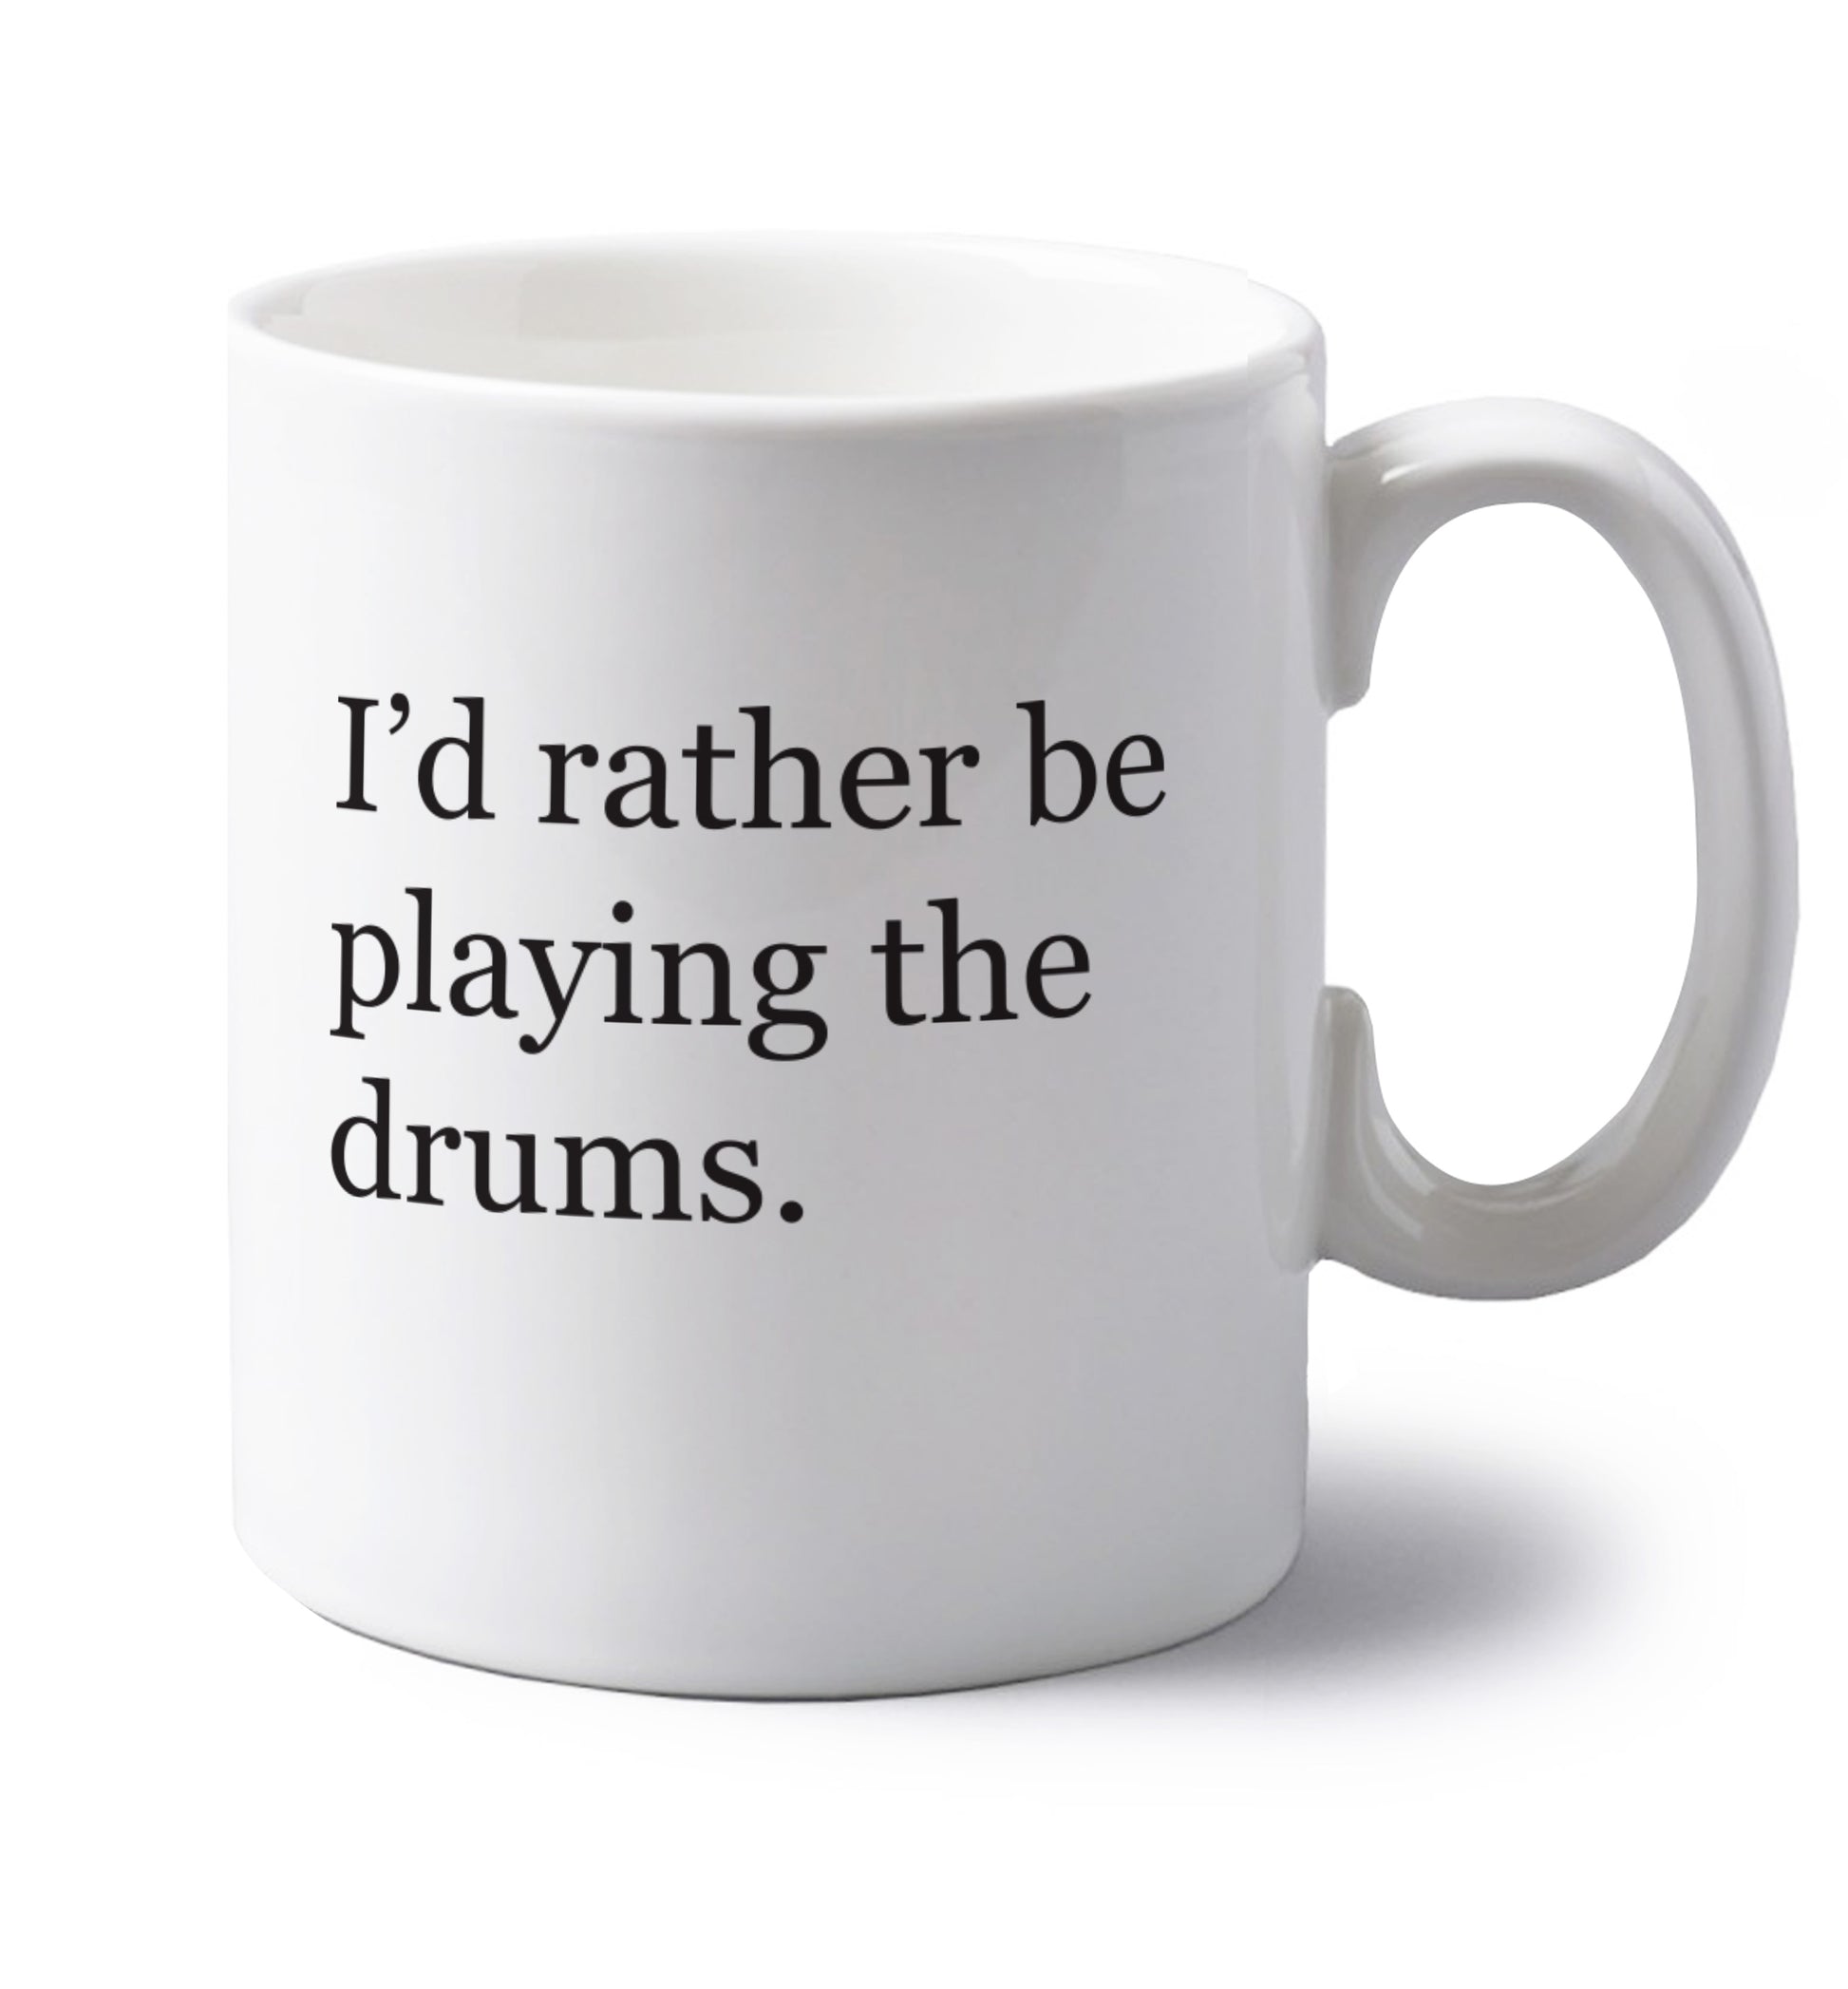 I'd rather be playing the drums left handed white ceramic mug 